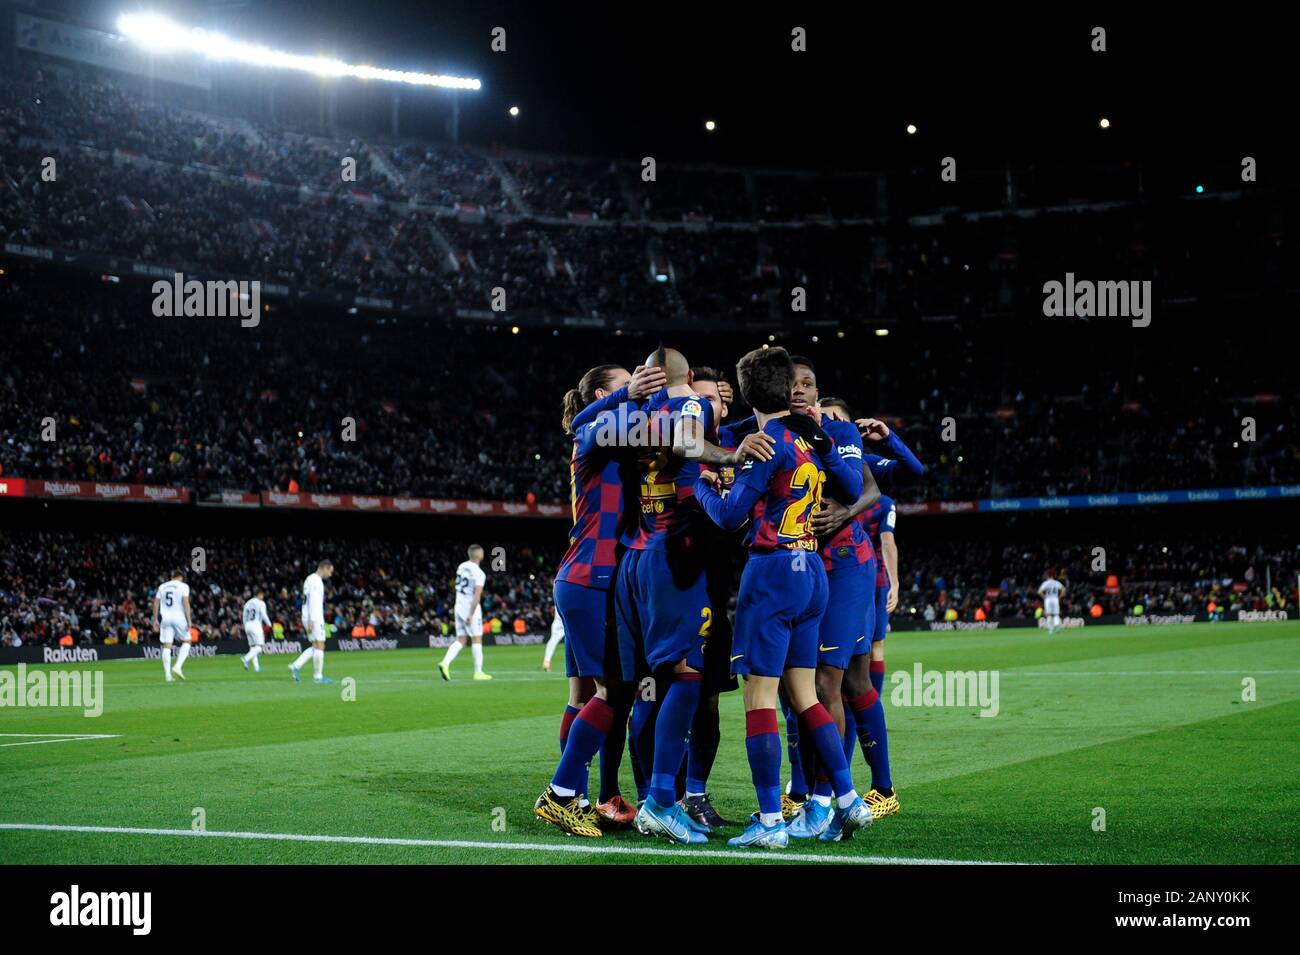 Fc Barcelona Players Celebrate The Goal During The Liga Match Between Fc Barcelona And Granada Cf At Camp Nou On January 19 In Barcelona Spain Photo By Dax Espa Images Stock Photo